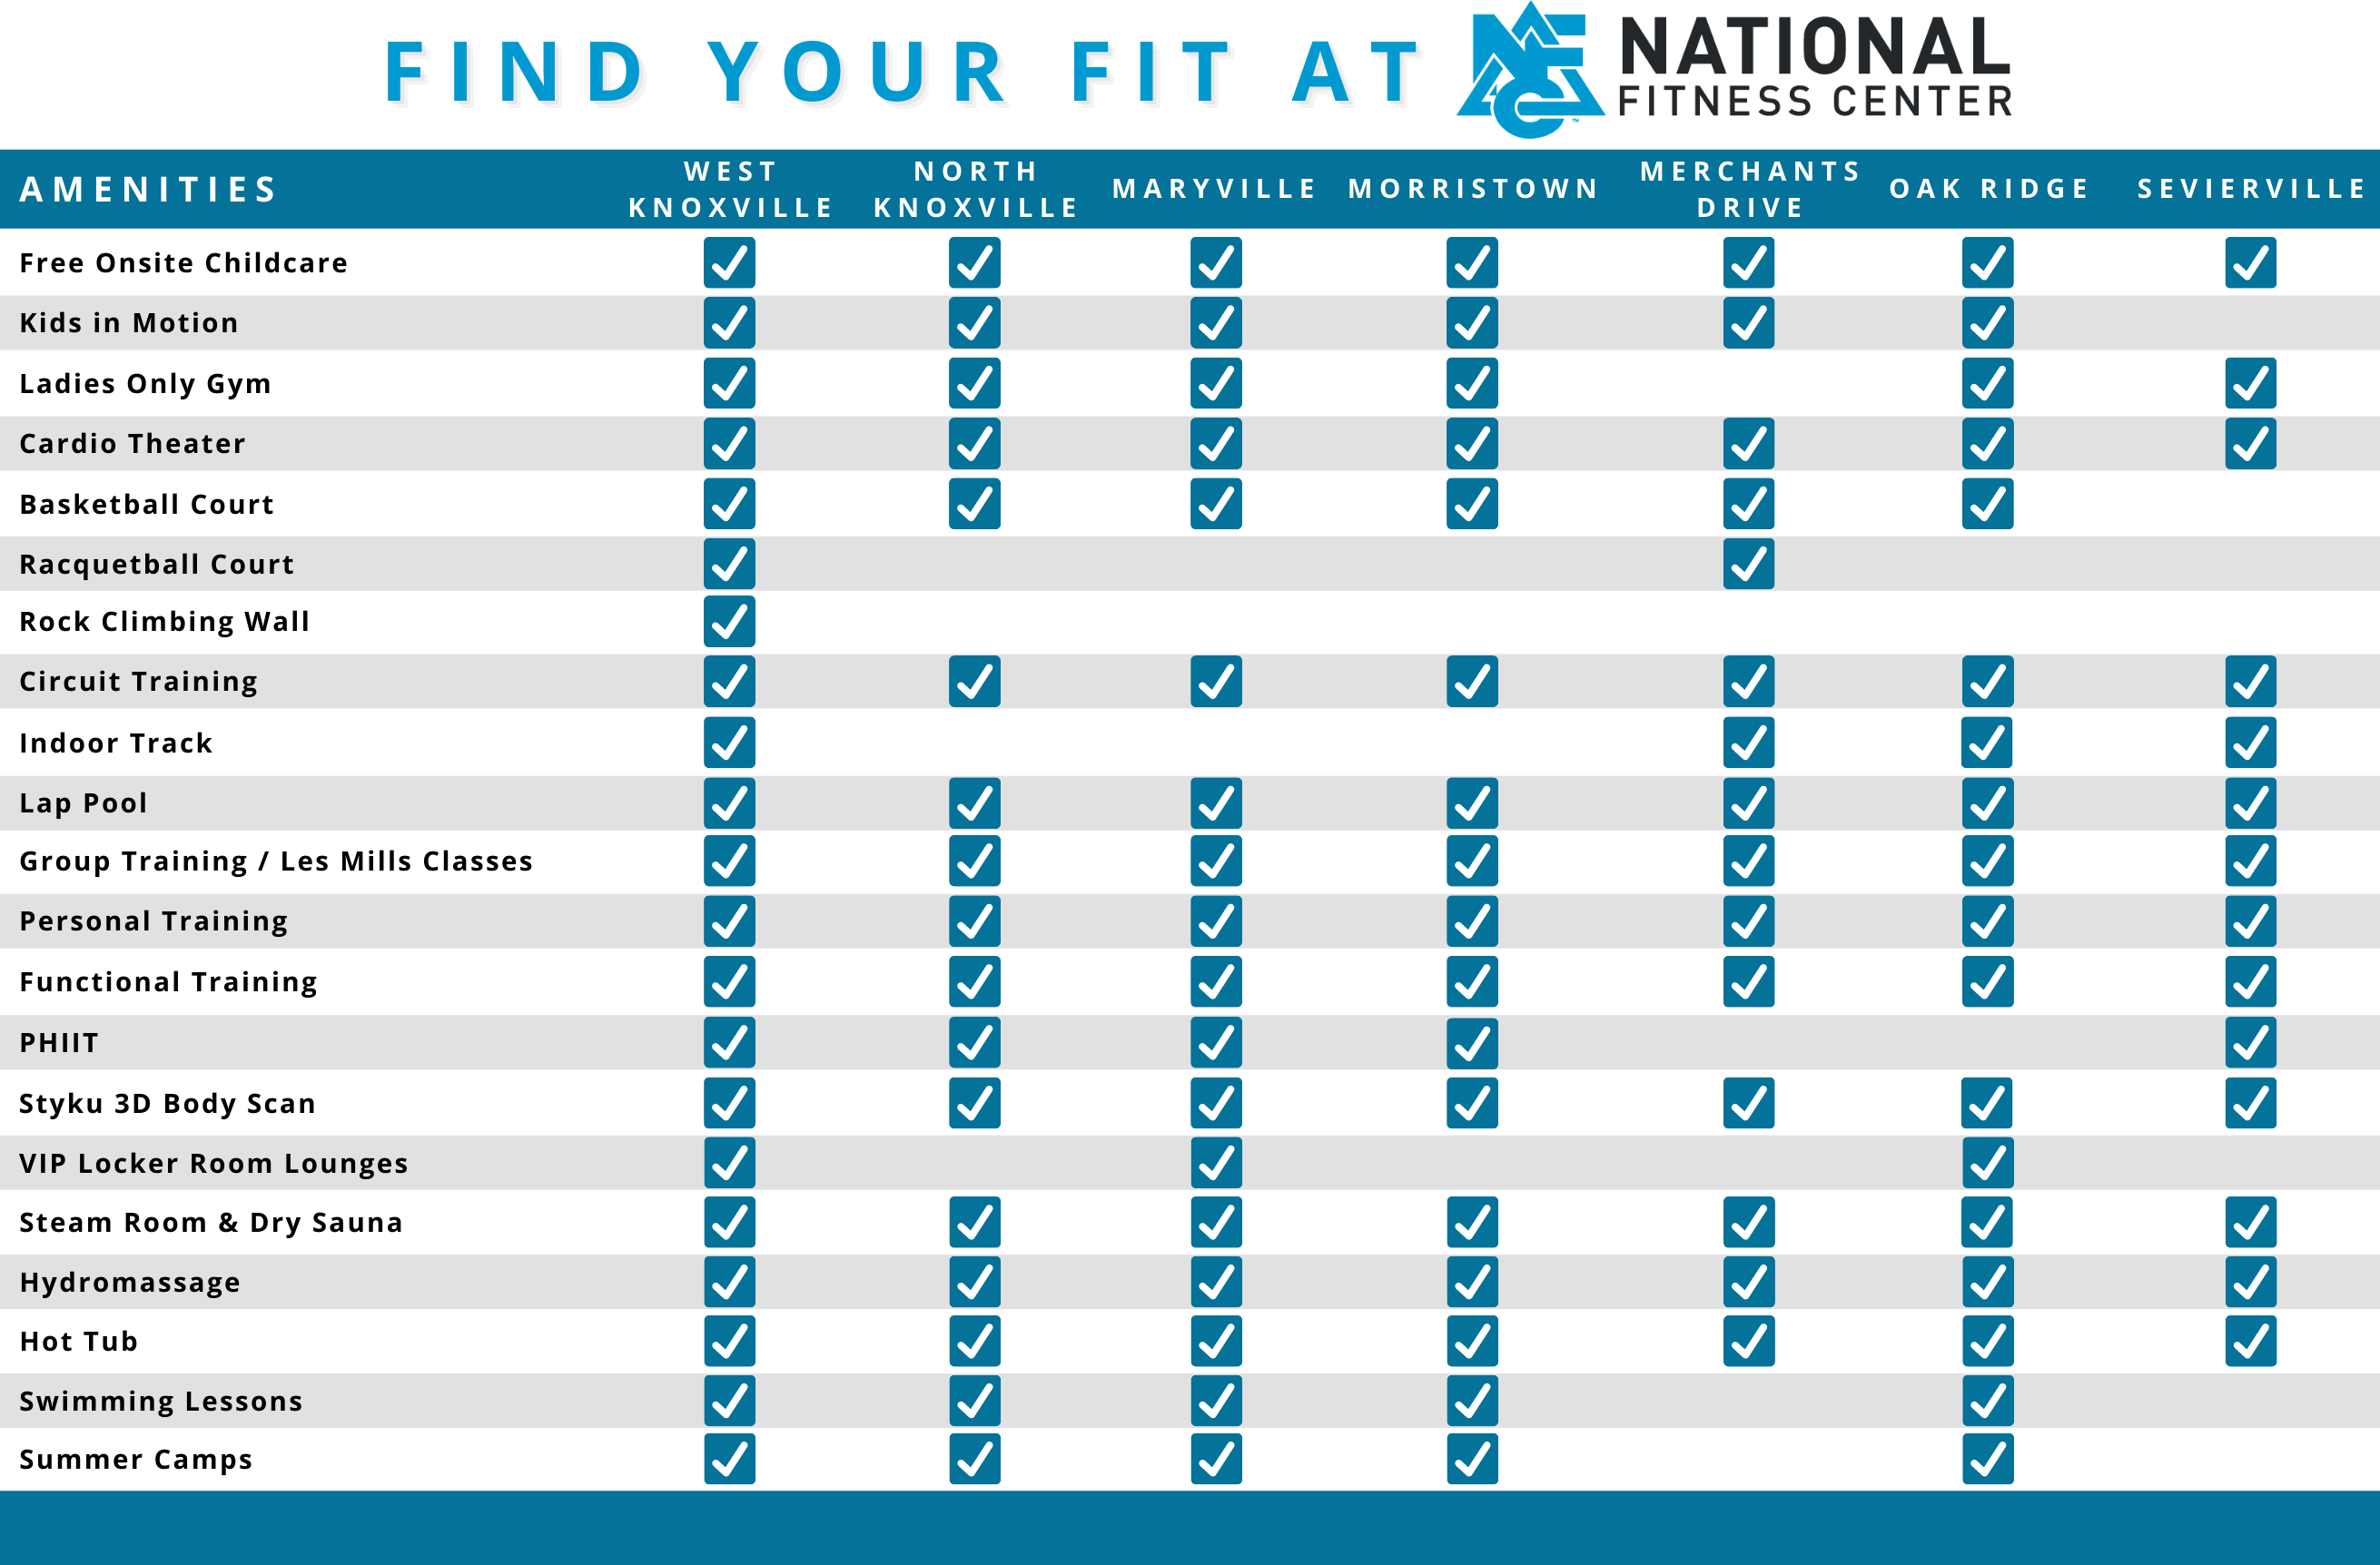 NFC Find your fit - amenities per location